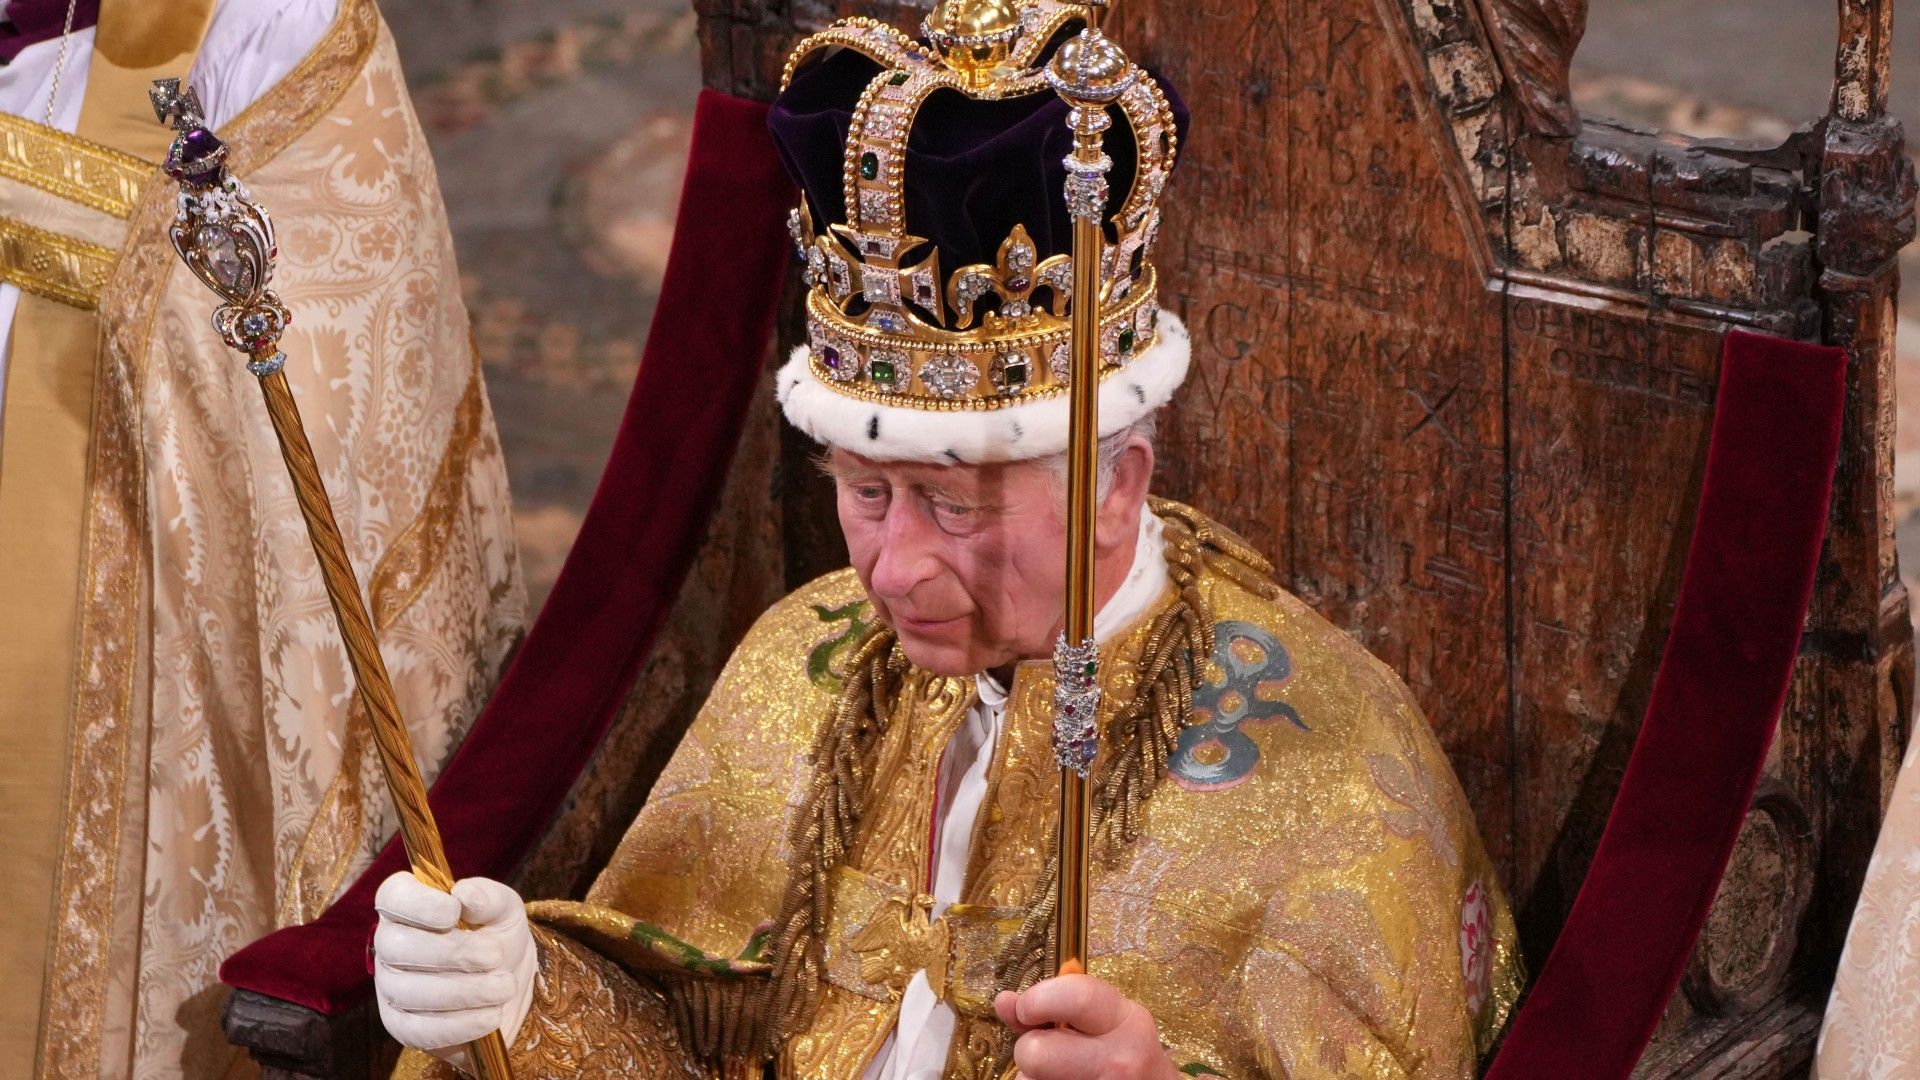 <p>                     Royal coronations are full of traditions that have been passed down for centuries, and one of the traditions that happened during King Charles III's swearing-in was the appearance of the Stone of Scone, placed under his coronation chair in Westminster Abbey.                    </p>                                      <p>                     The stone is said to be of historic significance and has been around since the 13th century. It was first used by King Edward I for his coronation; he took the stone after winning the First Scottish War of Independence. It is now officially property of the Crown, and sits under the coronation chair every time the ceremony happens.                   </p>